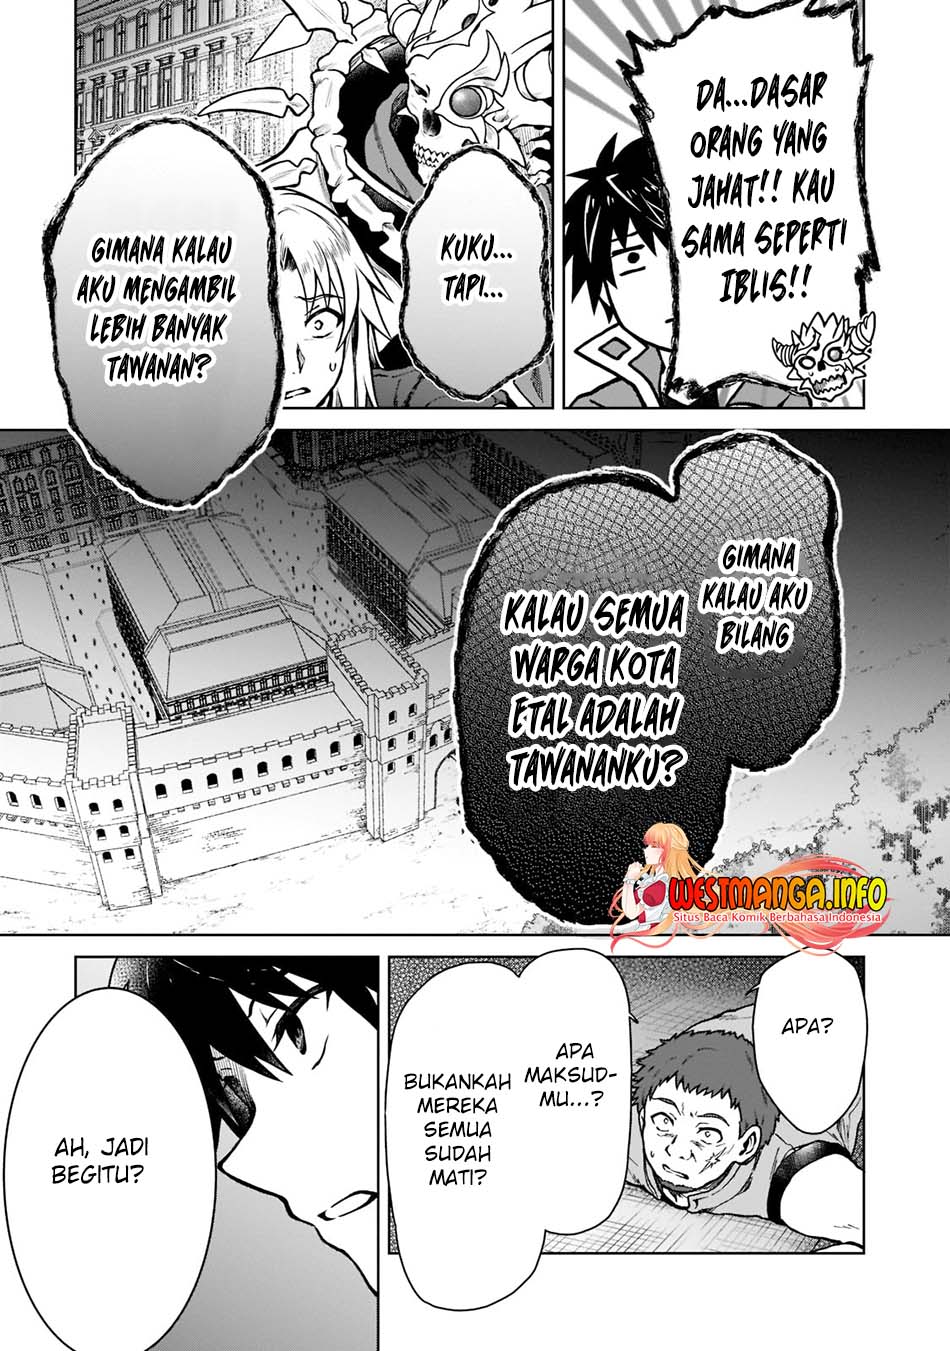 Dilarang COPAS - situs resmi www.mangacanblog.com - Komik d rank adventurer invited by a brave party and the stalking princess 011 - chapter 11 12 Indonesia d rank adventurer invited by a brave party and the stalking princess 011 - chapter 11 Terbaru 10|Baca Manga Komik Indonesia|Mangacan